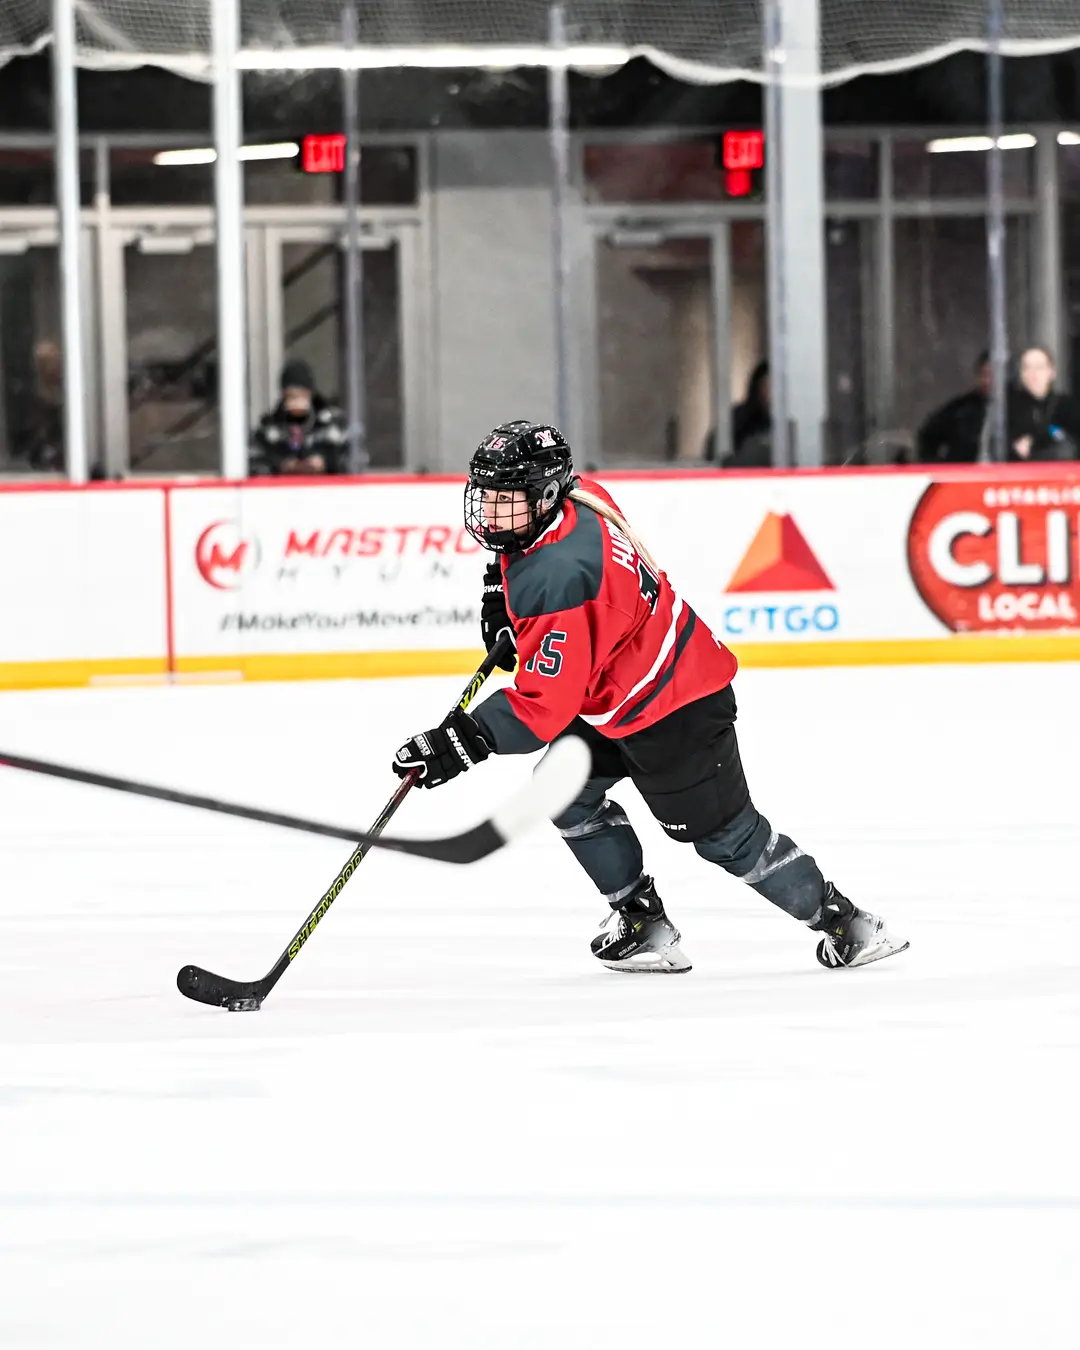 Savannah Harmon carrying the puck in her PWHL Ottawa jersey